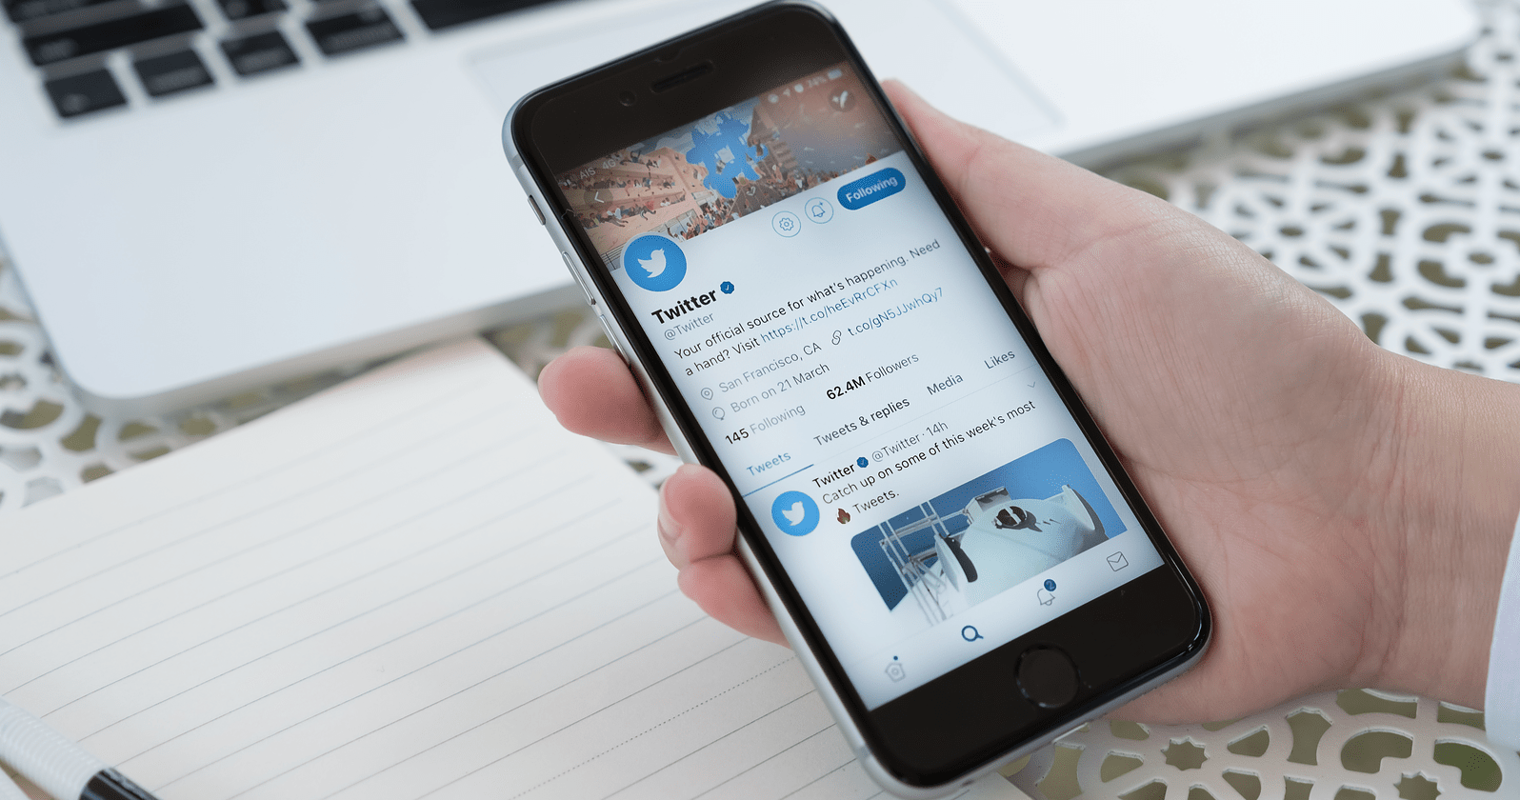 Twitter is Removing the Ability to Create ‘Moments’ on Mobile Apps